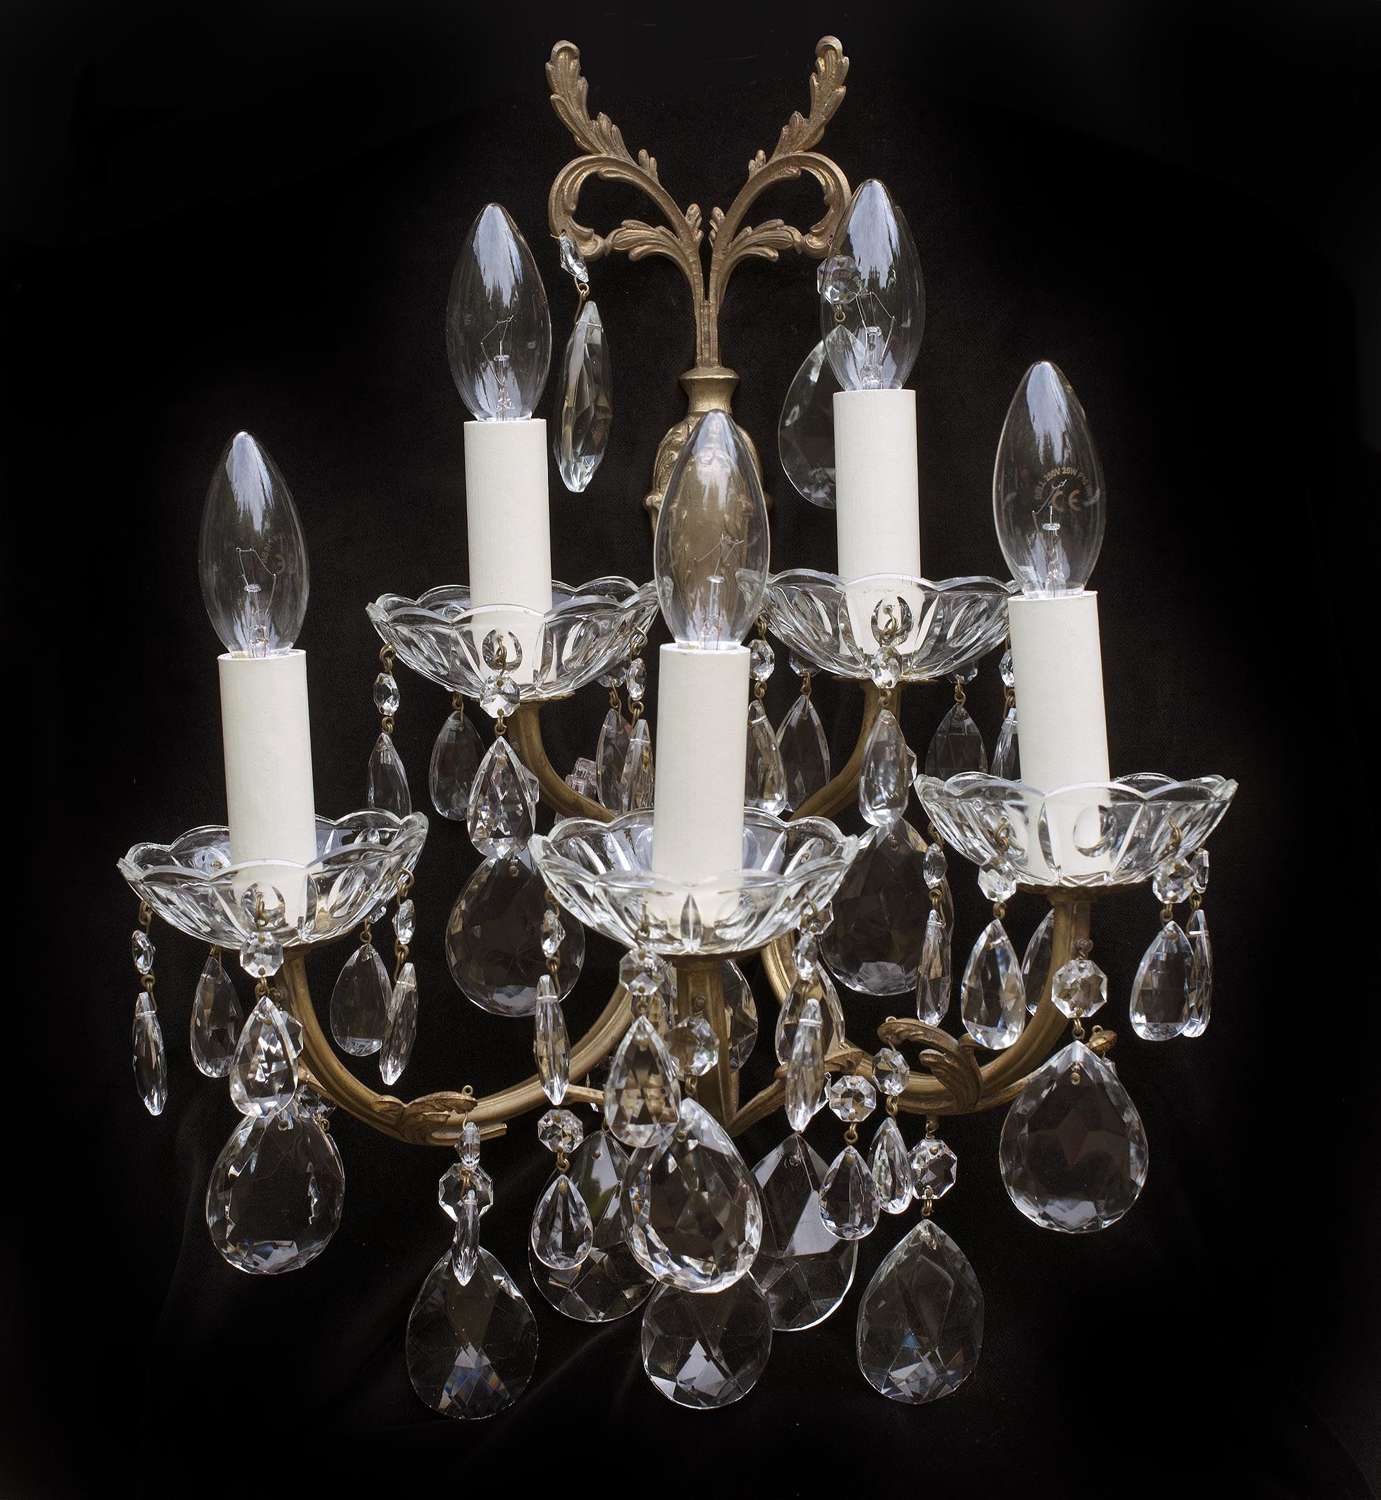 Large pair of 2 tiered antique Italian wall lights with crystal drops